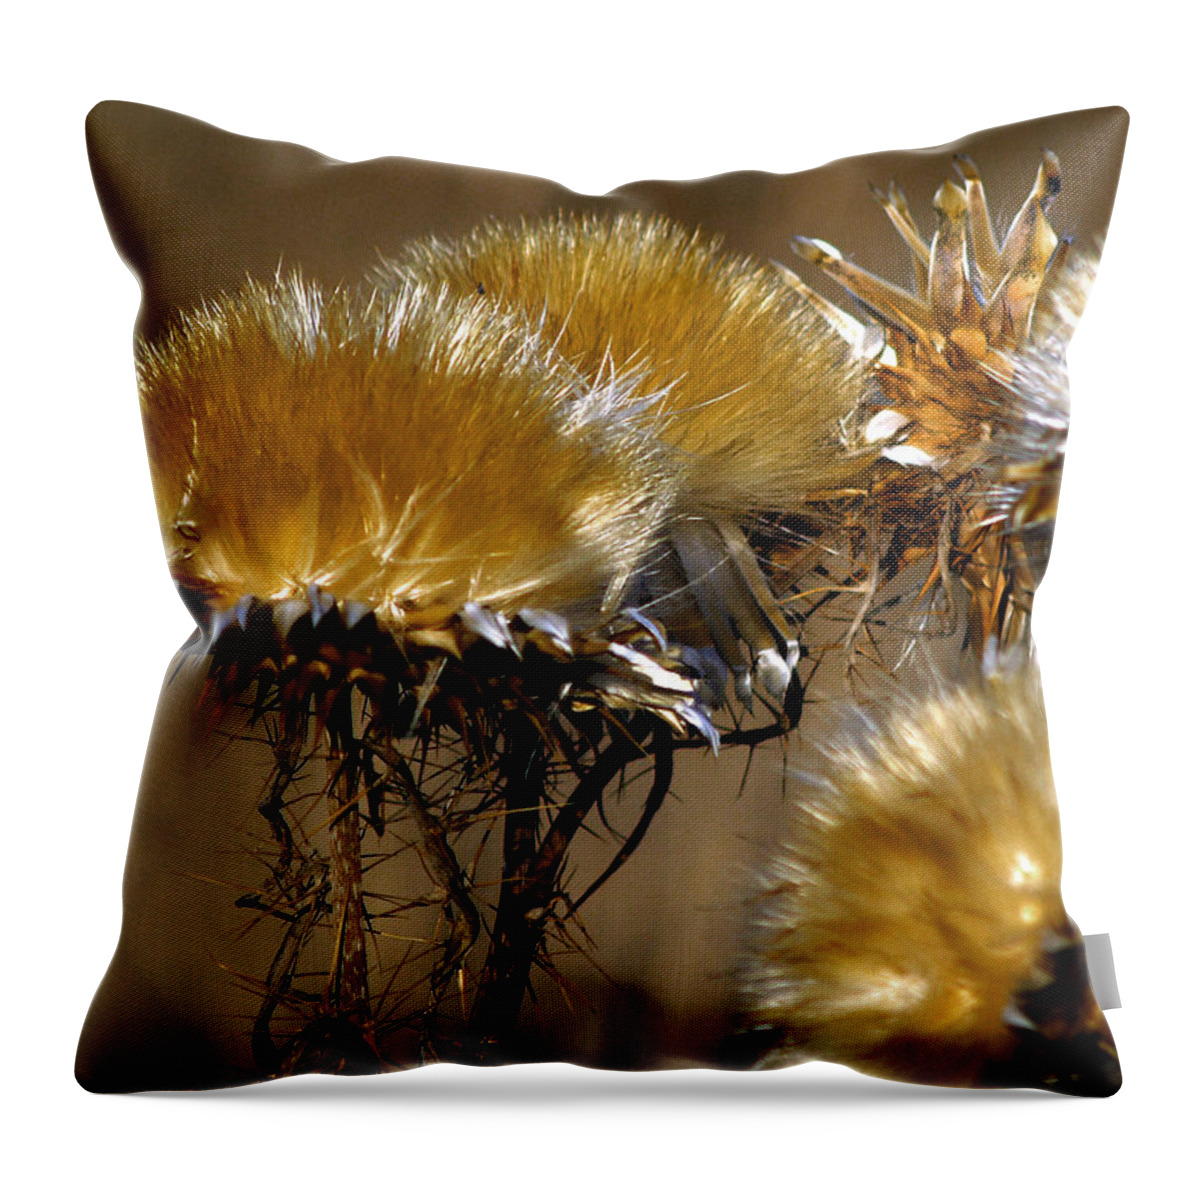 Wild Flowers Throw Pillow featuring the photograph Golden Thistle by Bill Gallagher